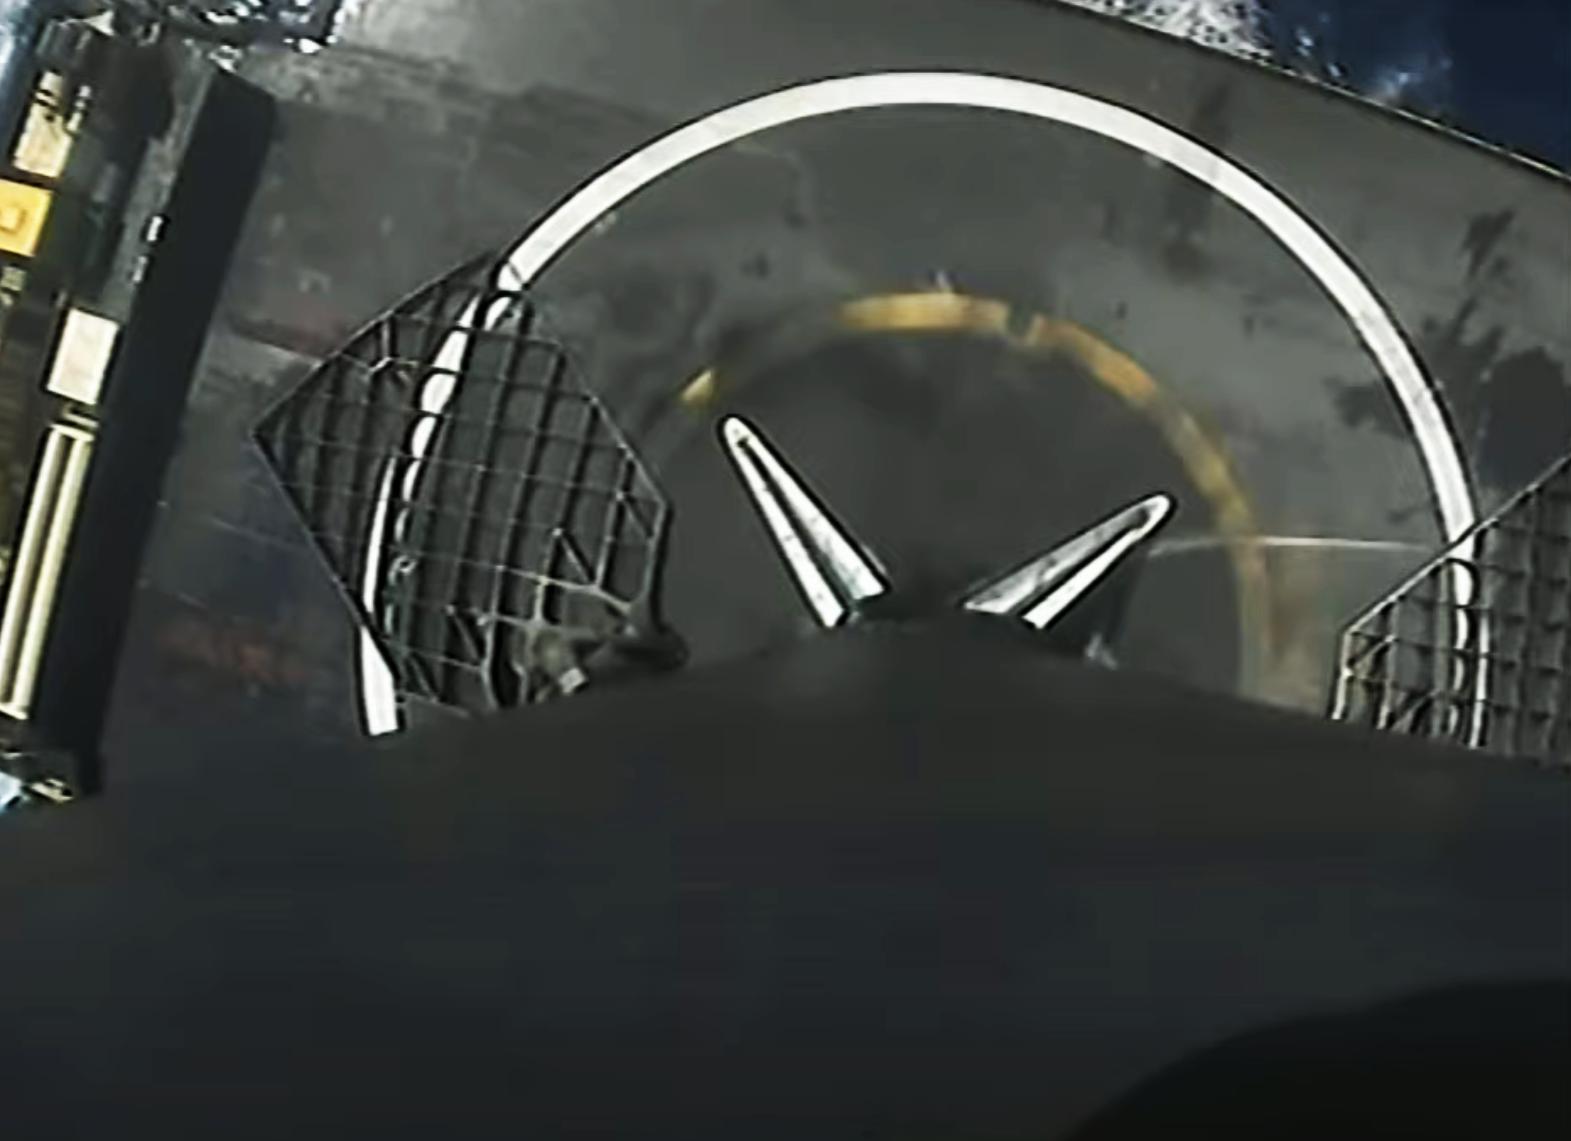 Starlink-25 Falcon 9 B1049 LC-39A 050421 webcast (SpaceX) landing 4